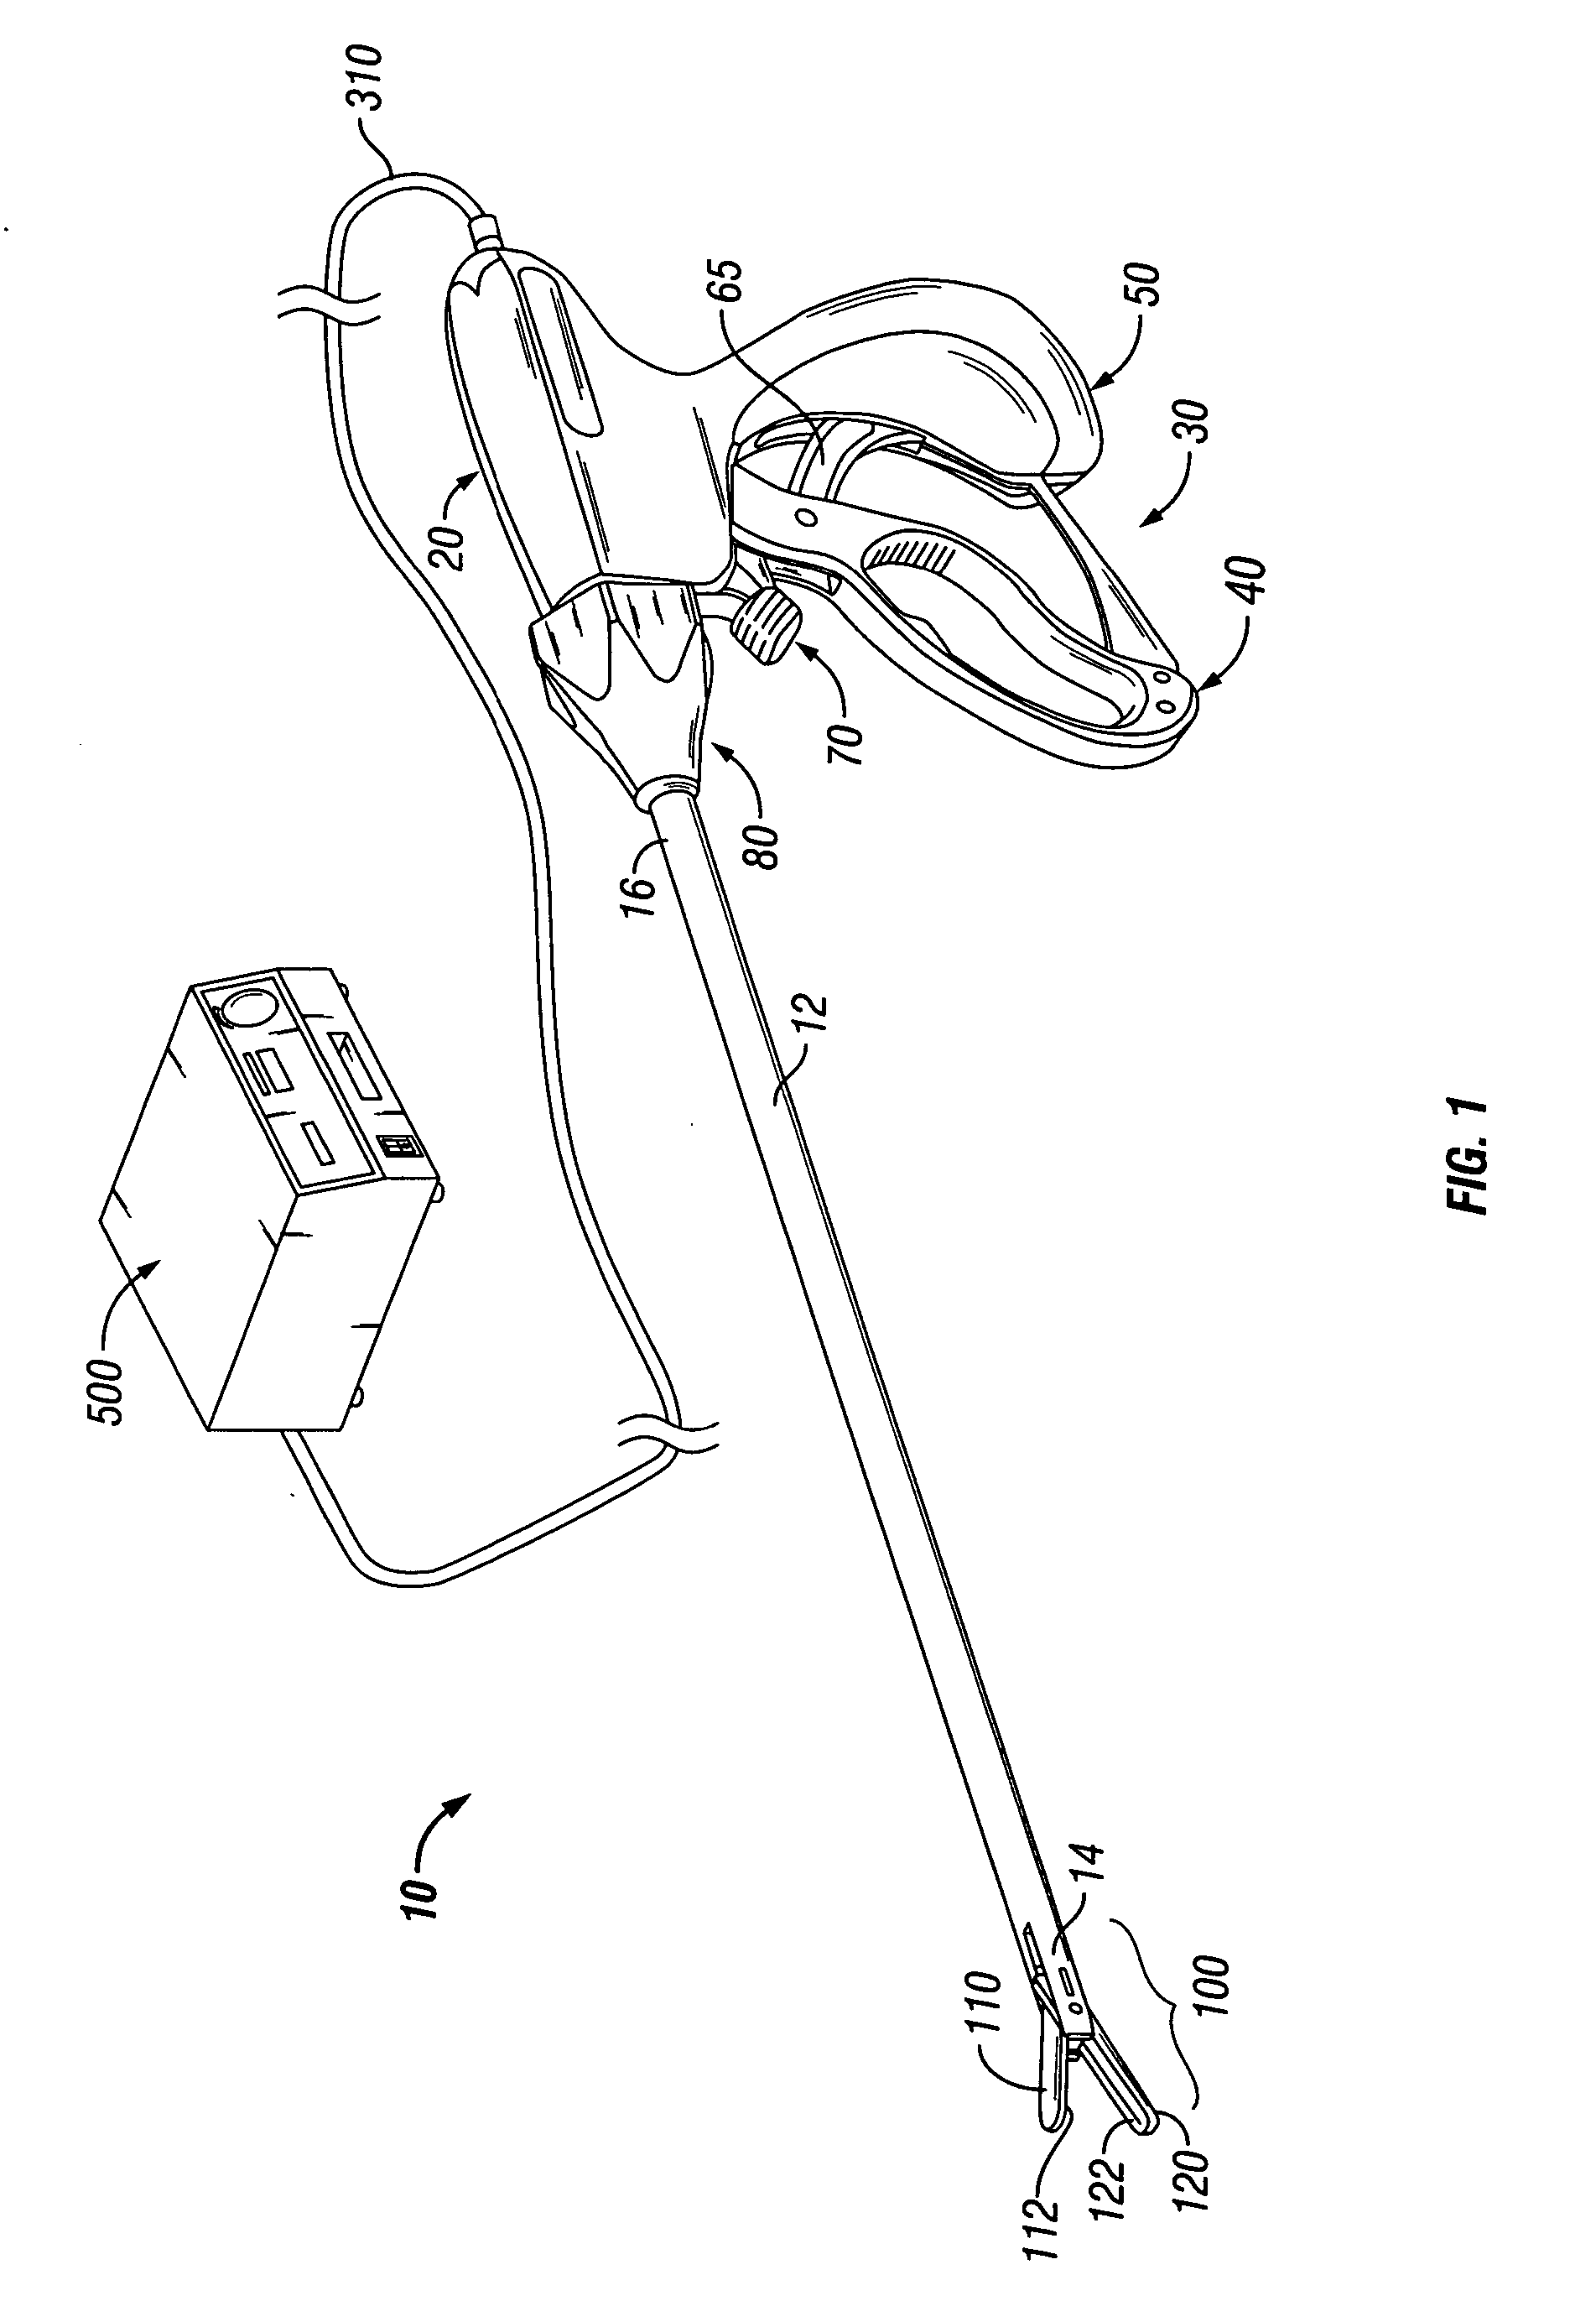 Electrosurgical forceps with energy based tissue division